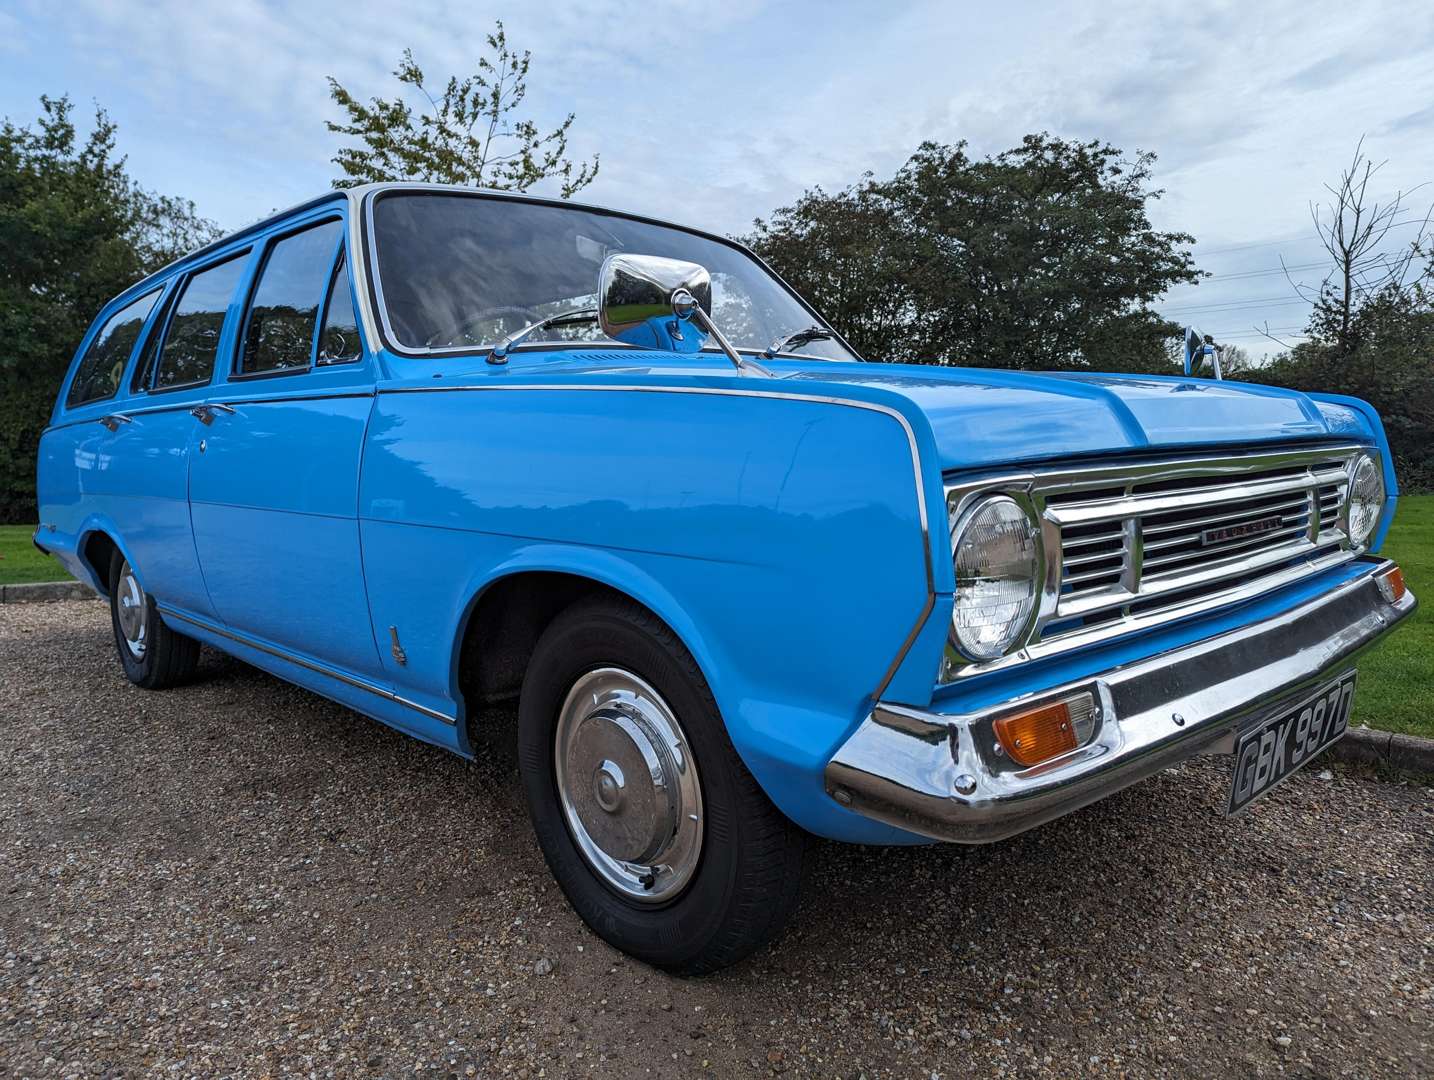 <p>1966 VAUXHALL VICTOR 101 FC DELUXE ESTATE</p>